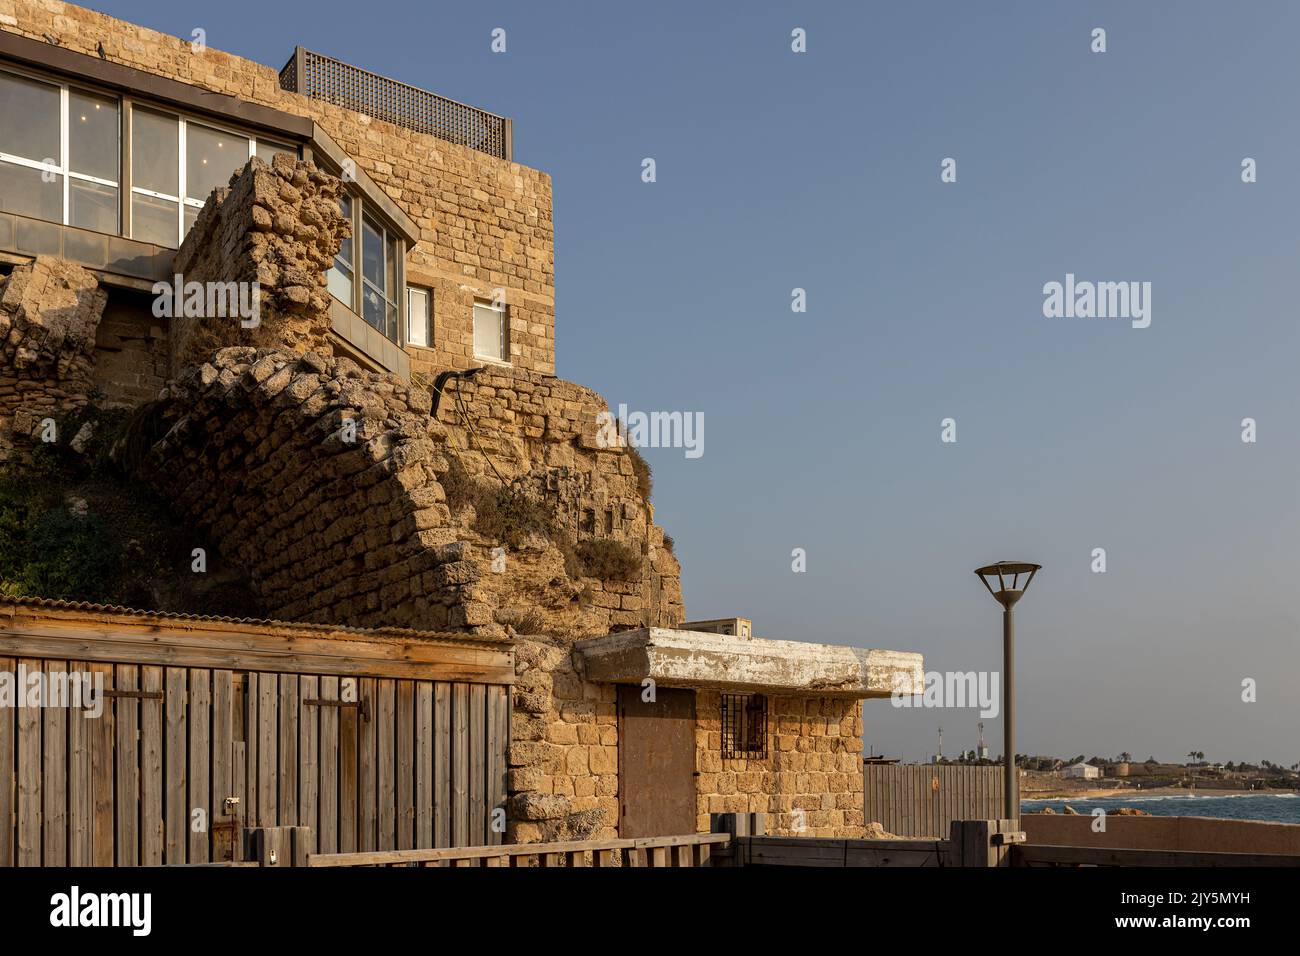 CAESAREA, Israel - August 11 2022:Tourists at Caesarea ancient port. The ancient Caesarea Maritima city and harbor was built by Herod the Great about Stock Photo